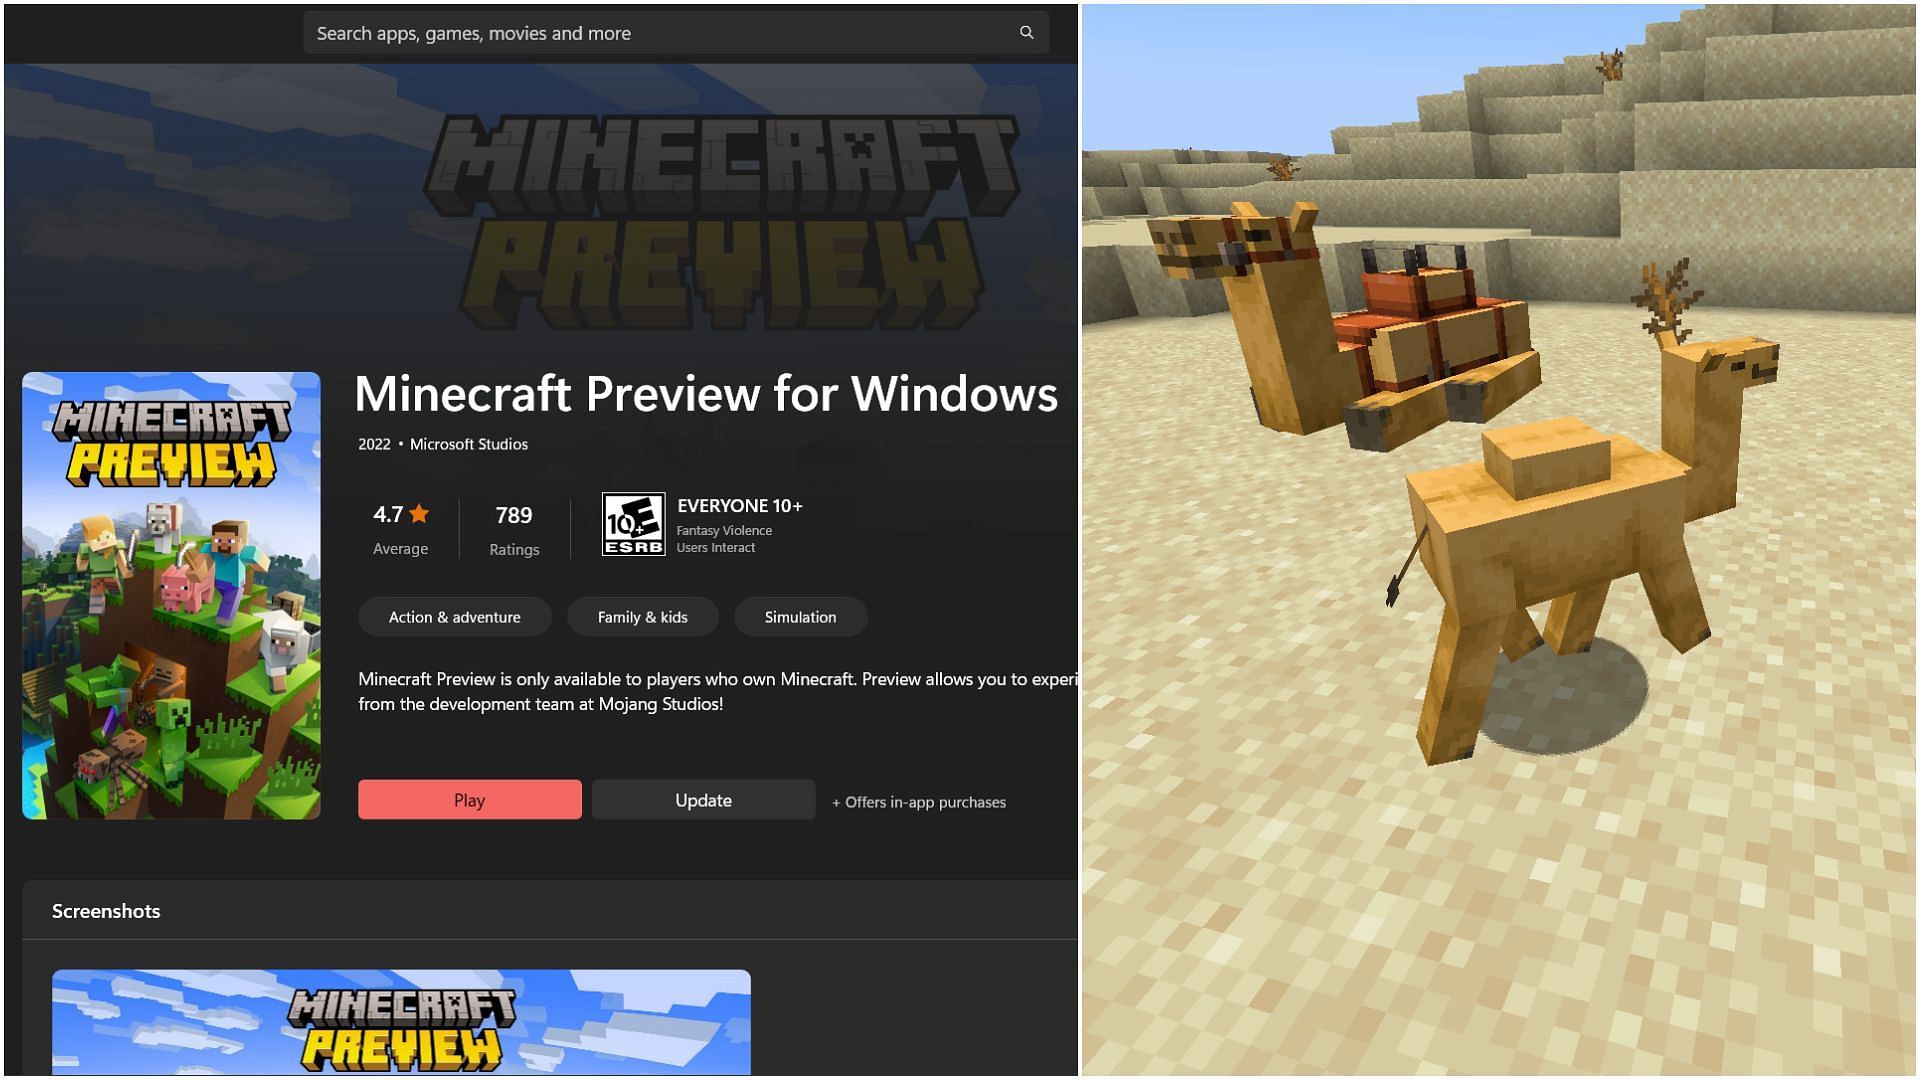 Minecraft Preview is Now Available for Windows Users